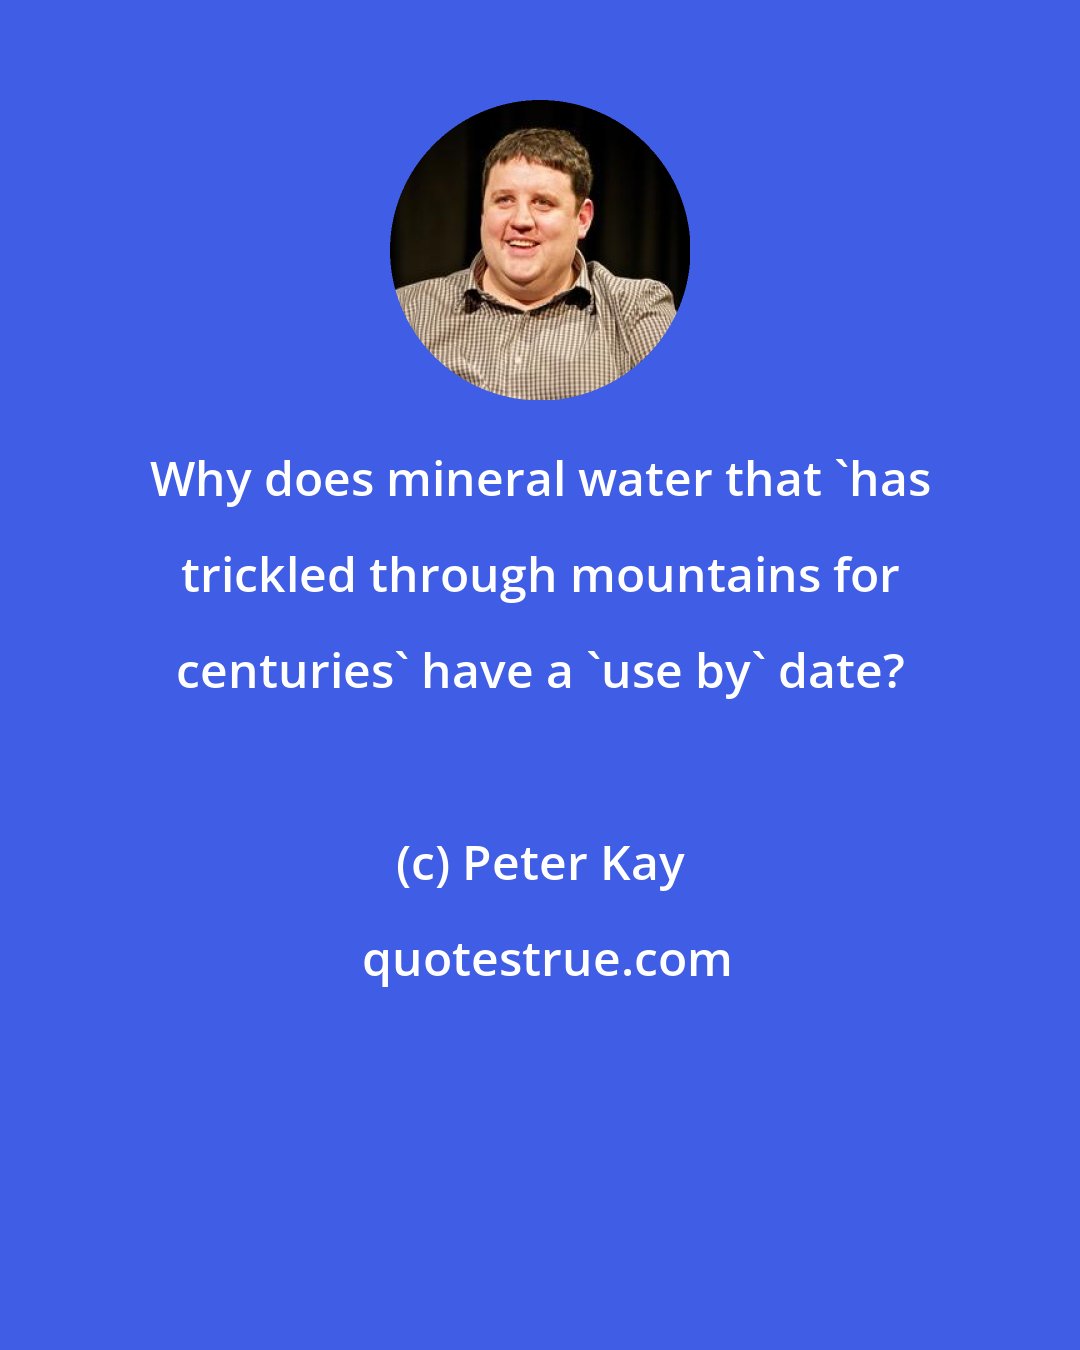 Peter Kay: Why does mineral water that 'has trickled through mountains for centuries' have a 'use by' date?